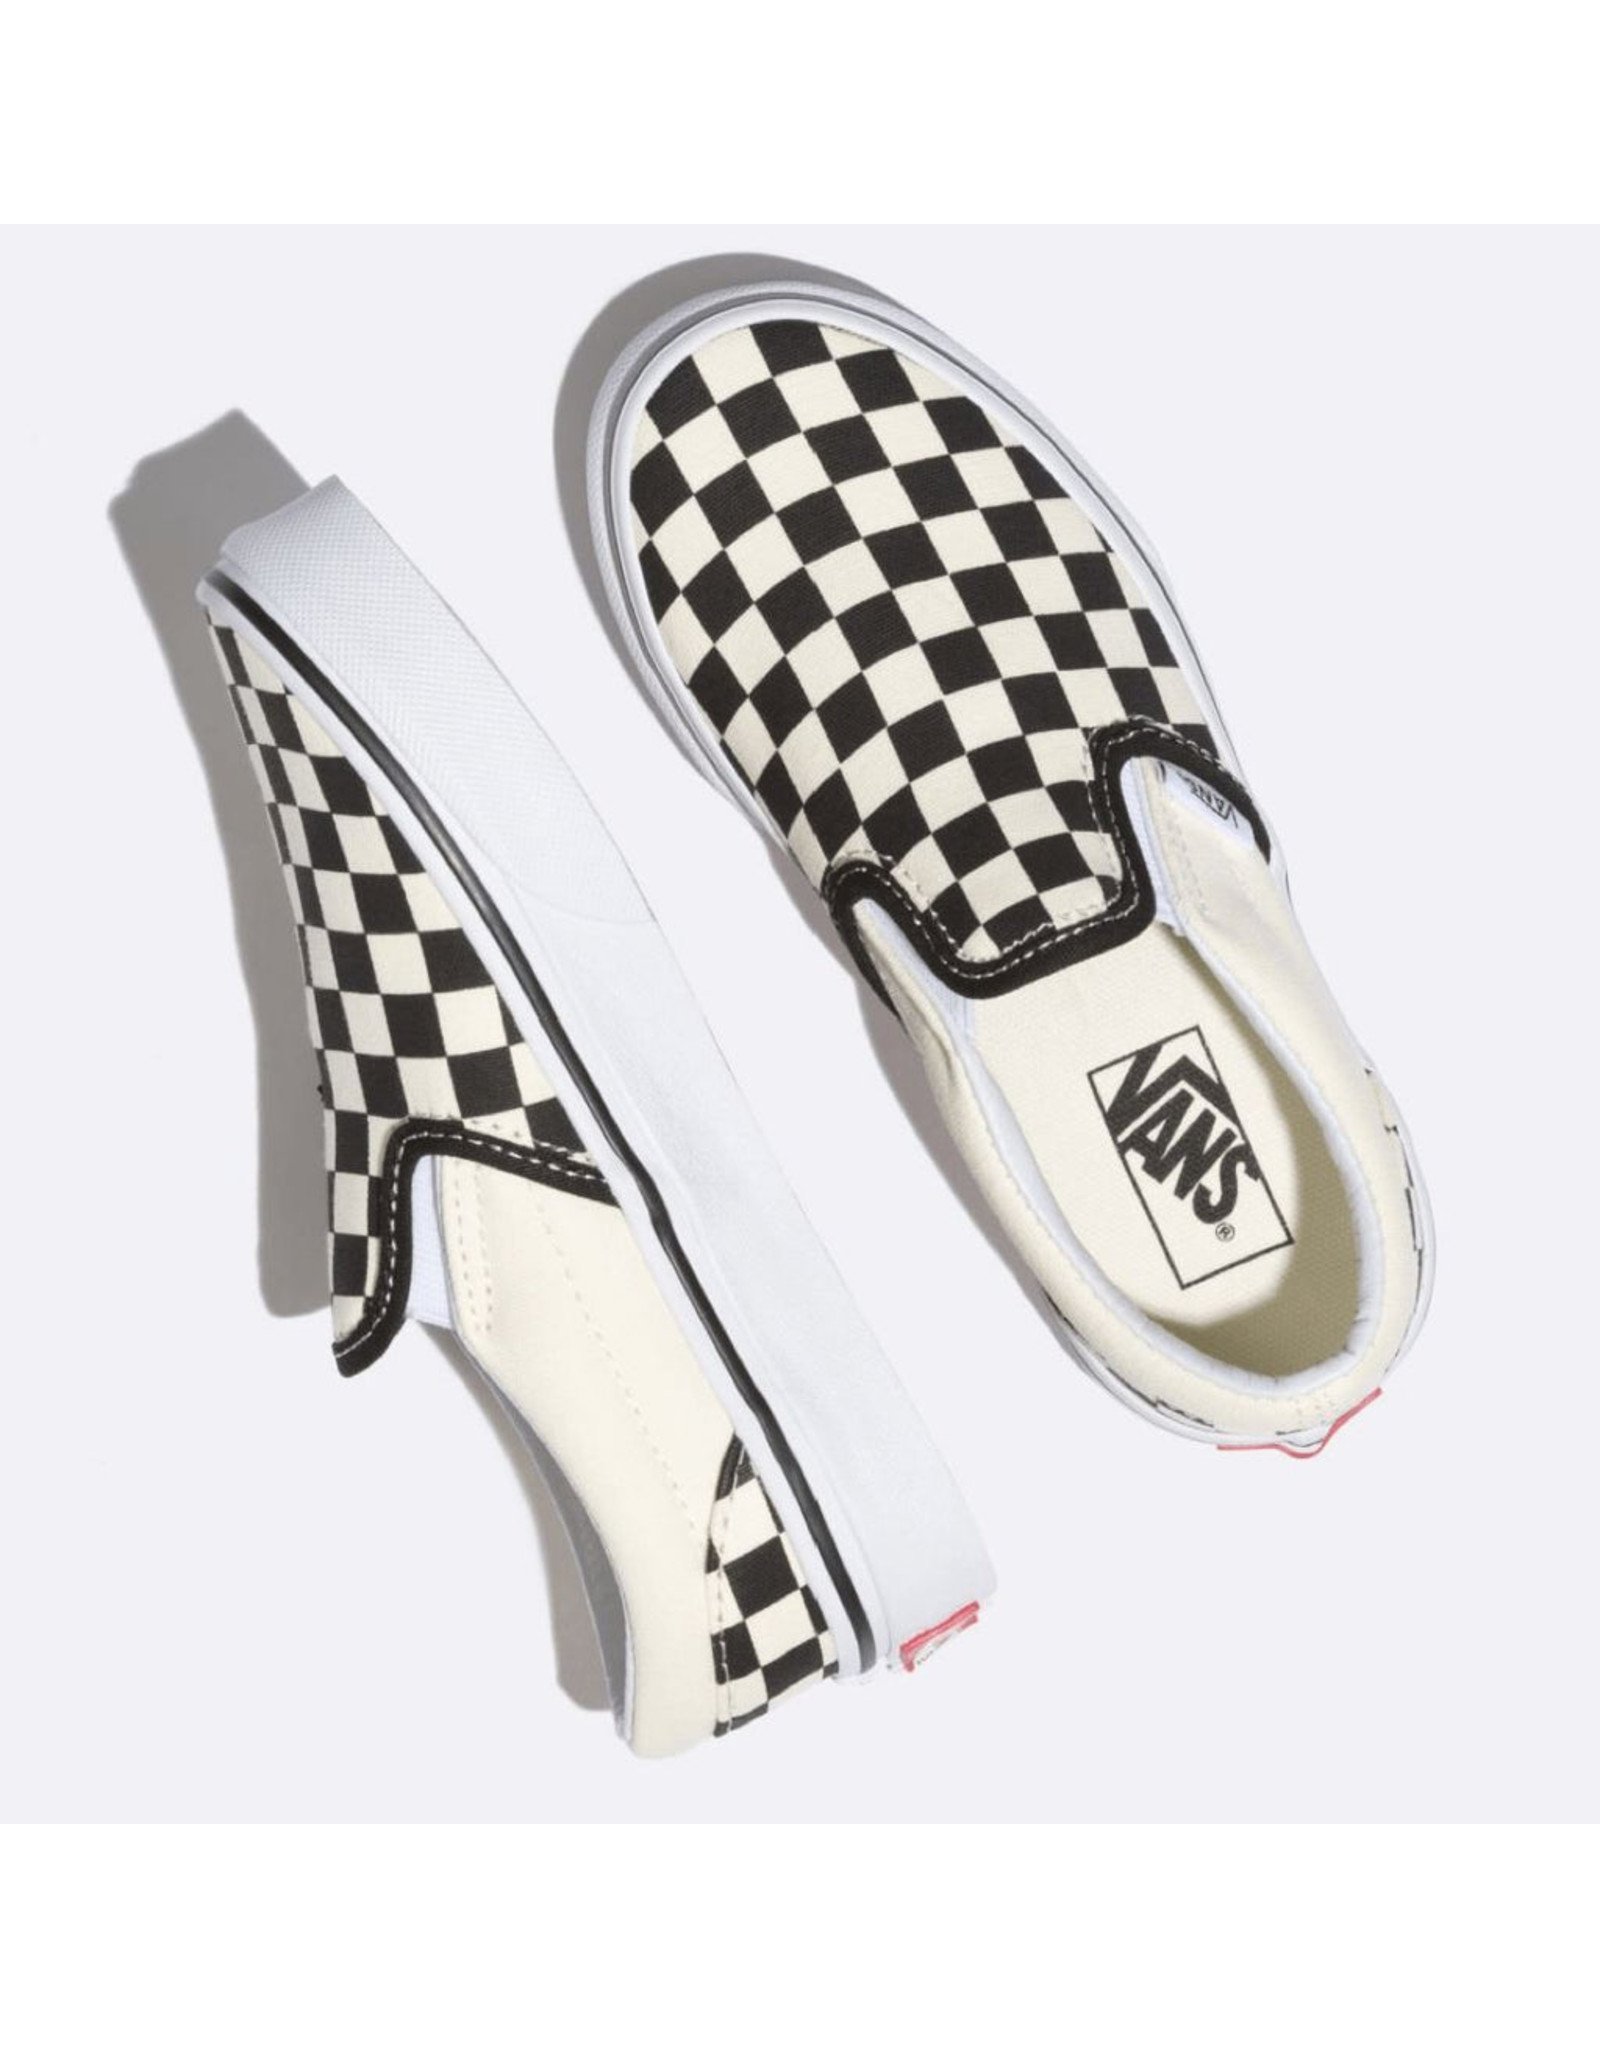 Vans Classic Slip On Youth Shoes